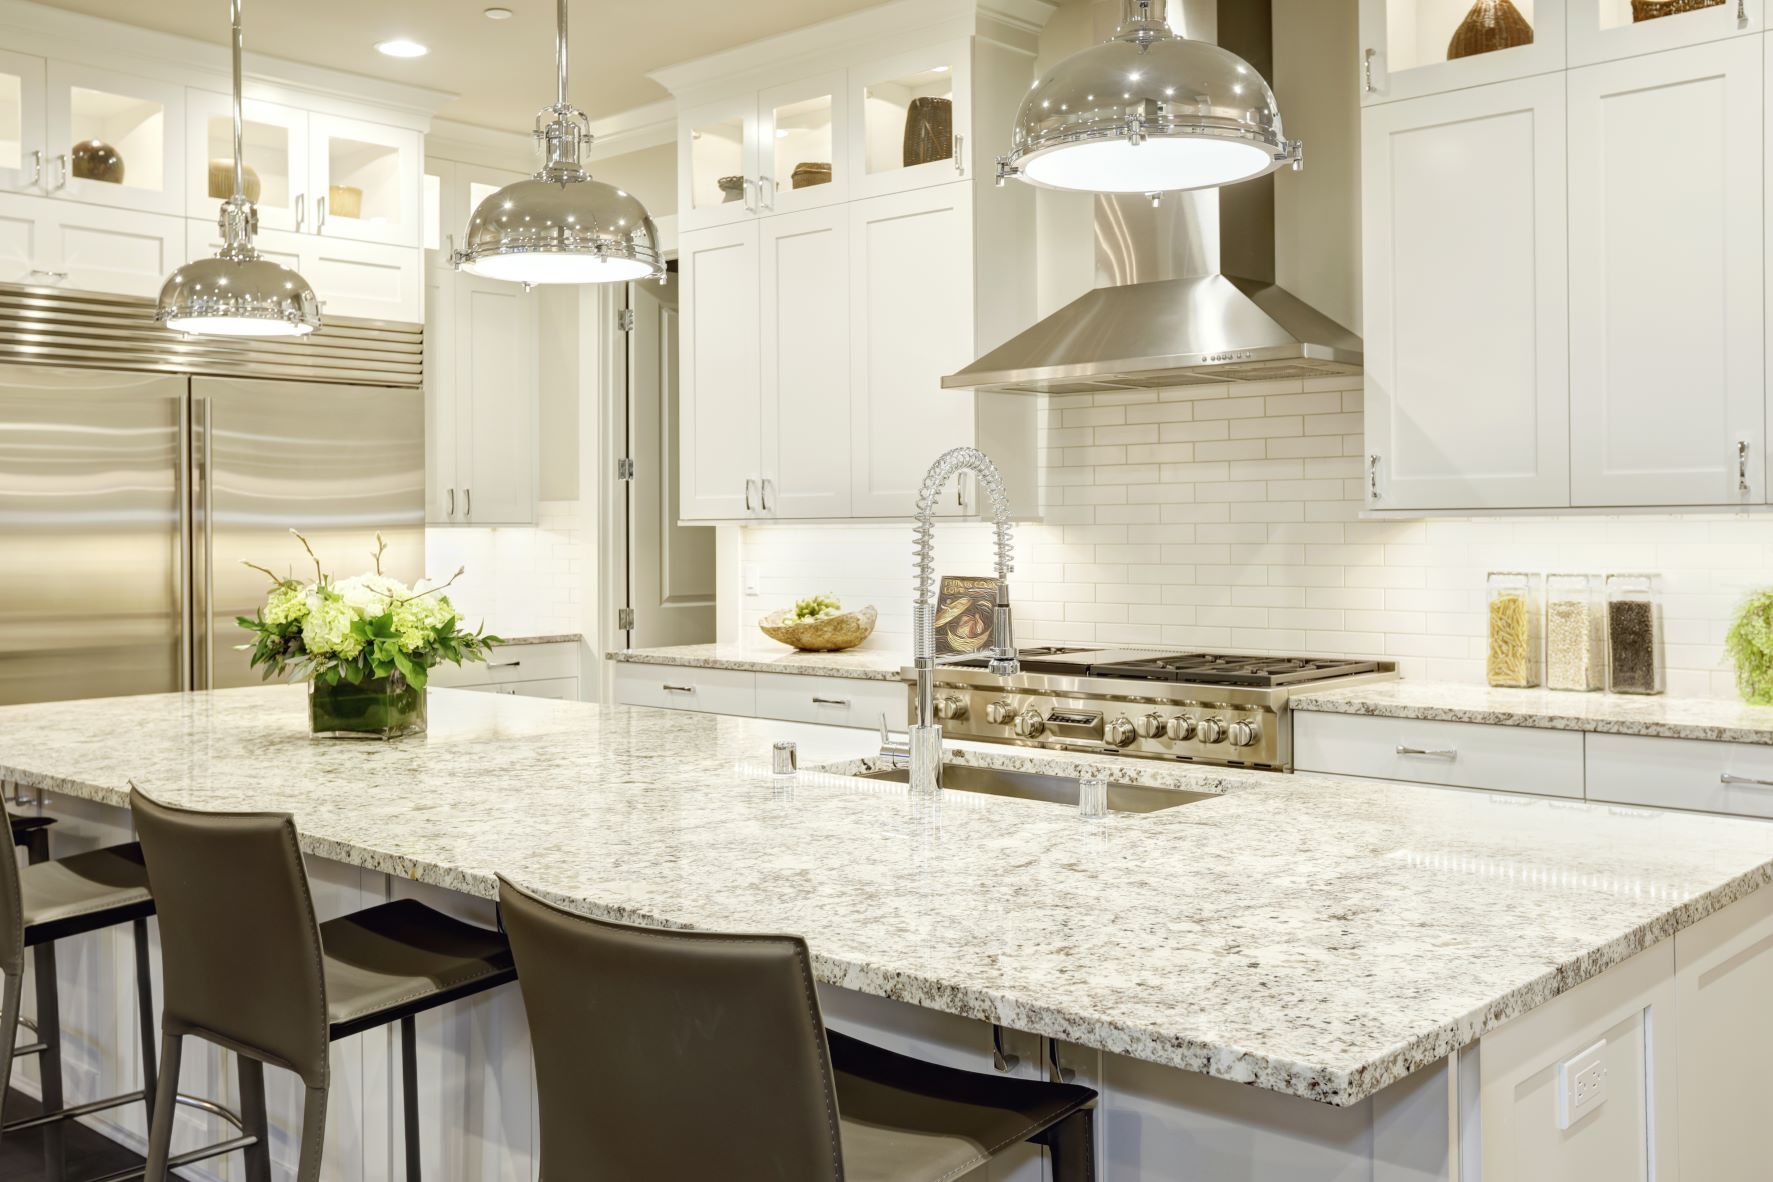 Are Granite Countertops Worth the Investment